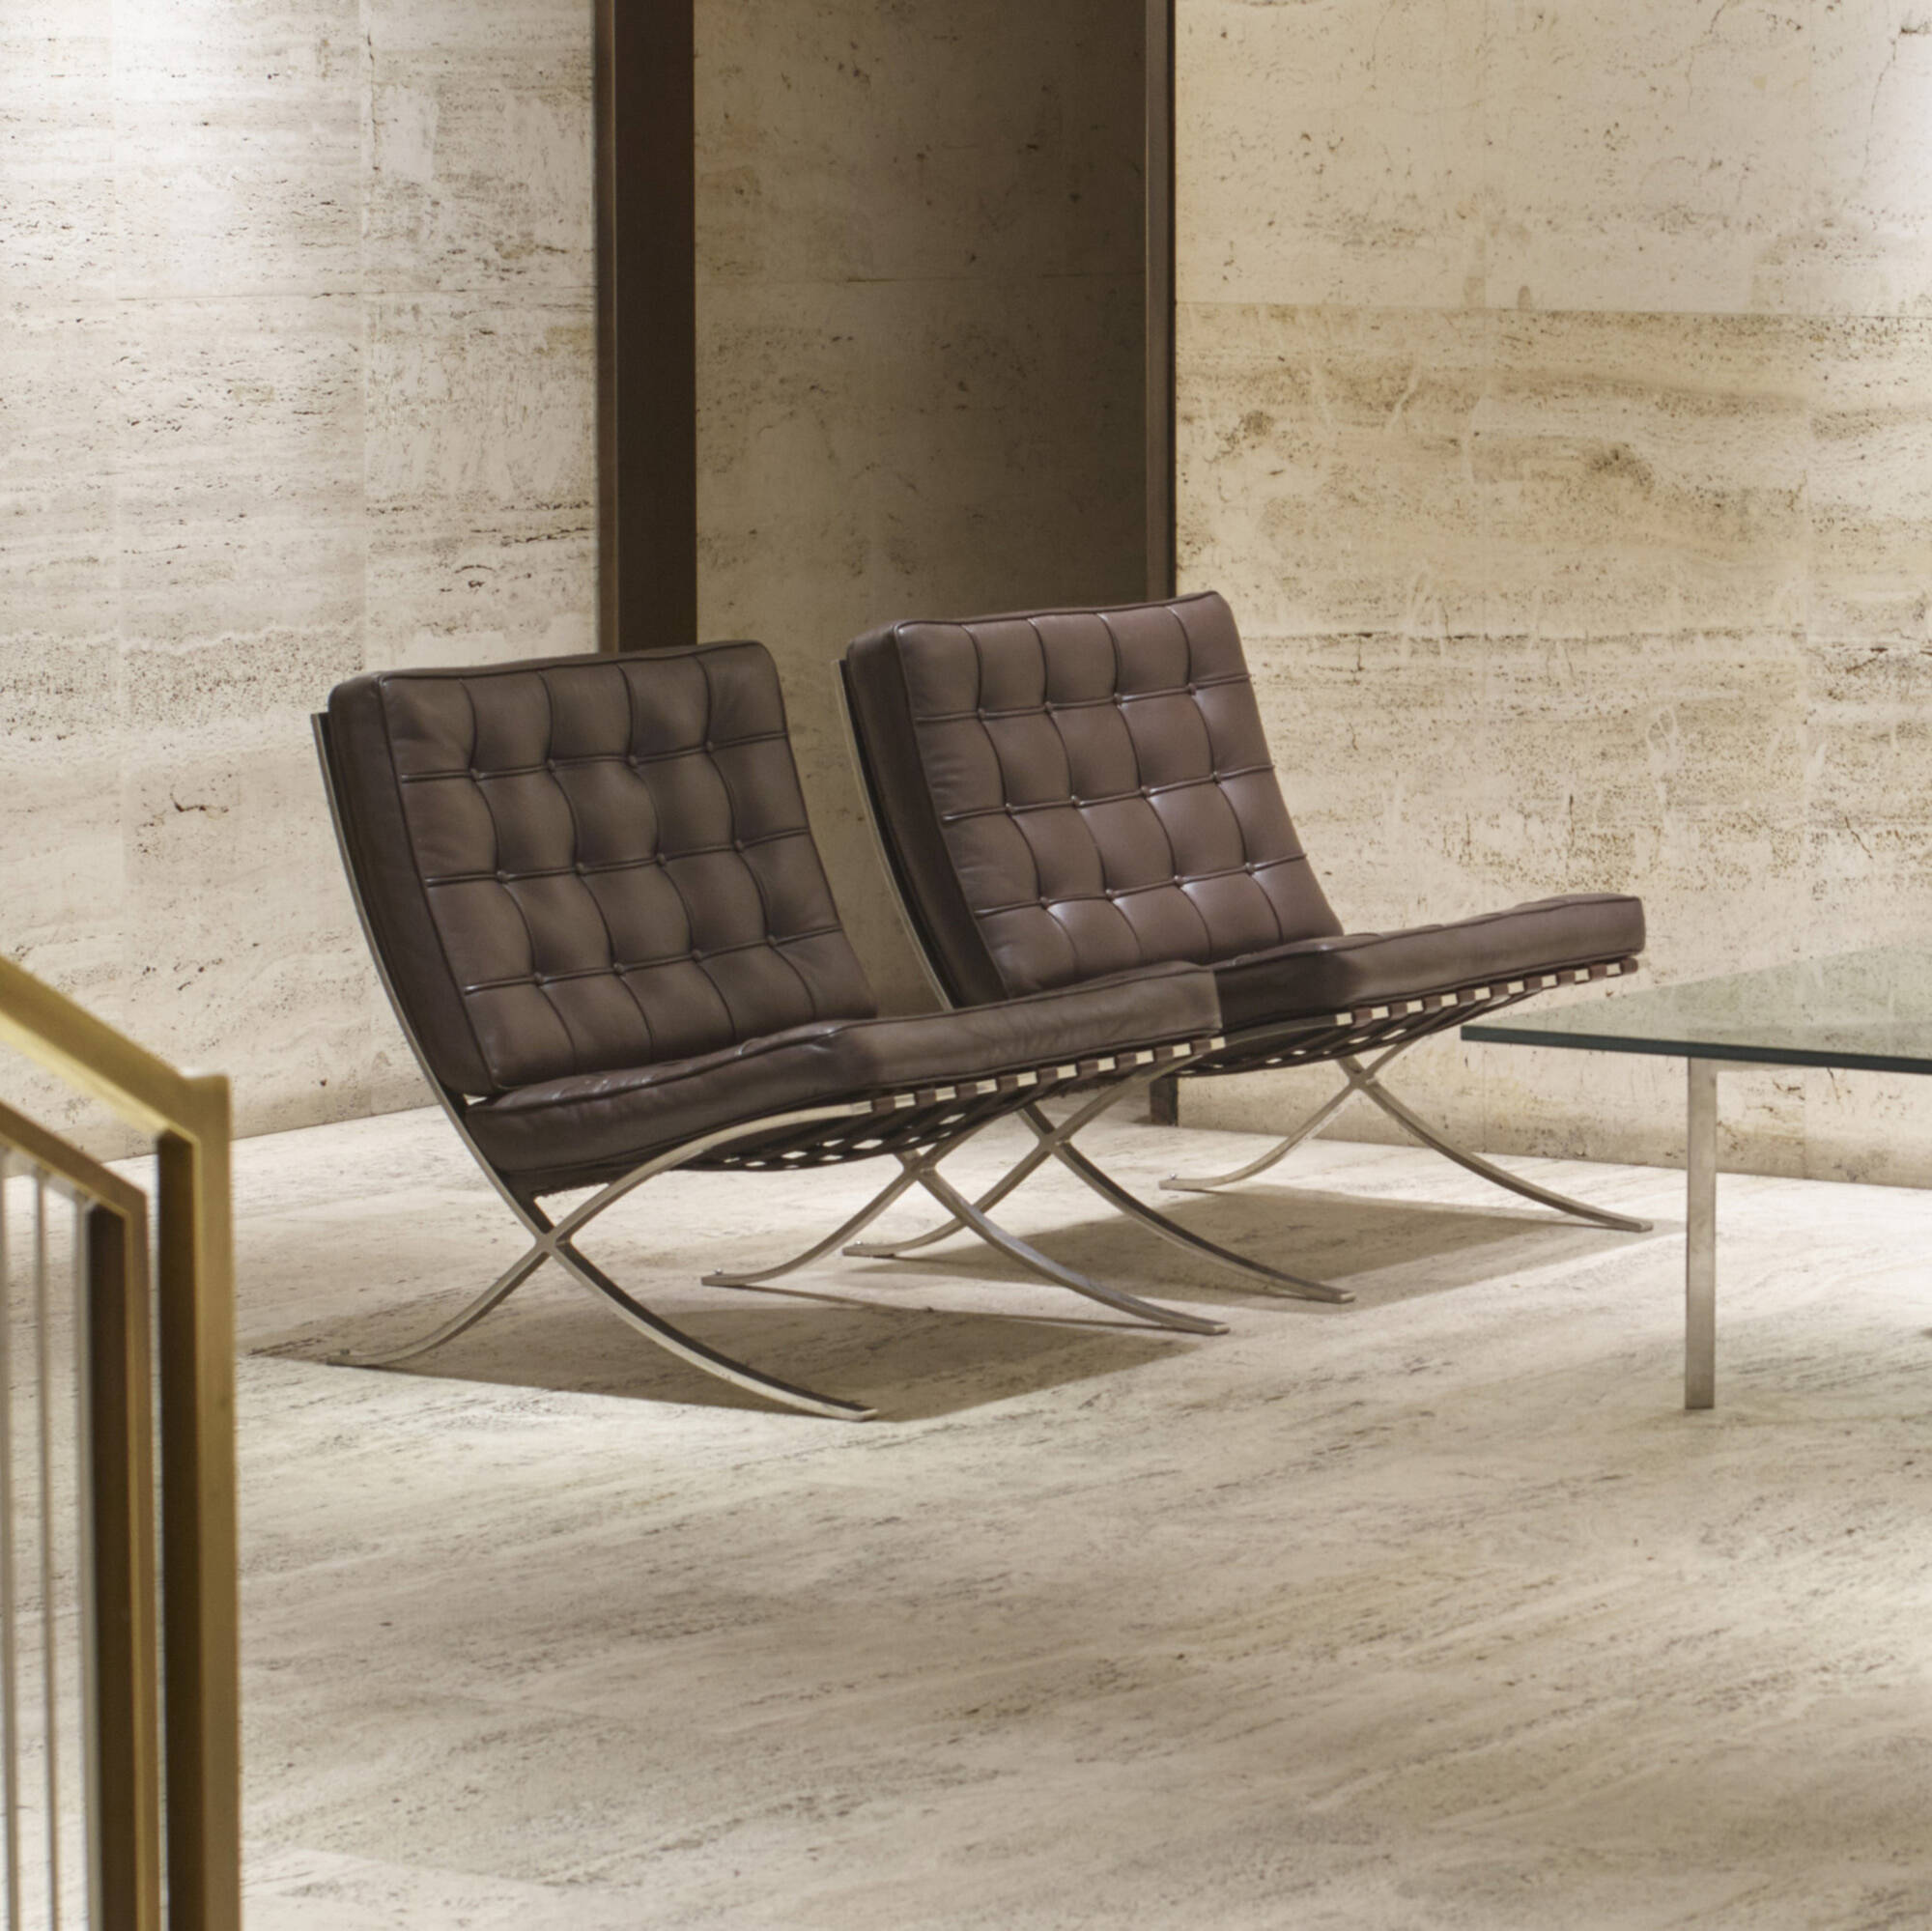 101 Ludwig Mies Van Der Rohe Barcelona Chairs From The Entrance Lobby Of The Four Seasons Pair The Four Seasons 26 July 2016 Auctions Wright Auctions Of Art And Design